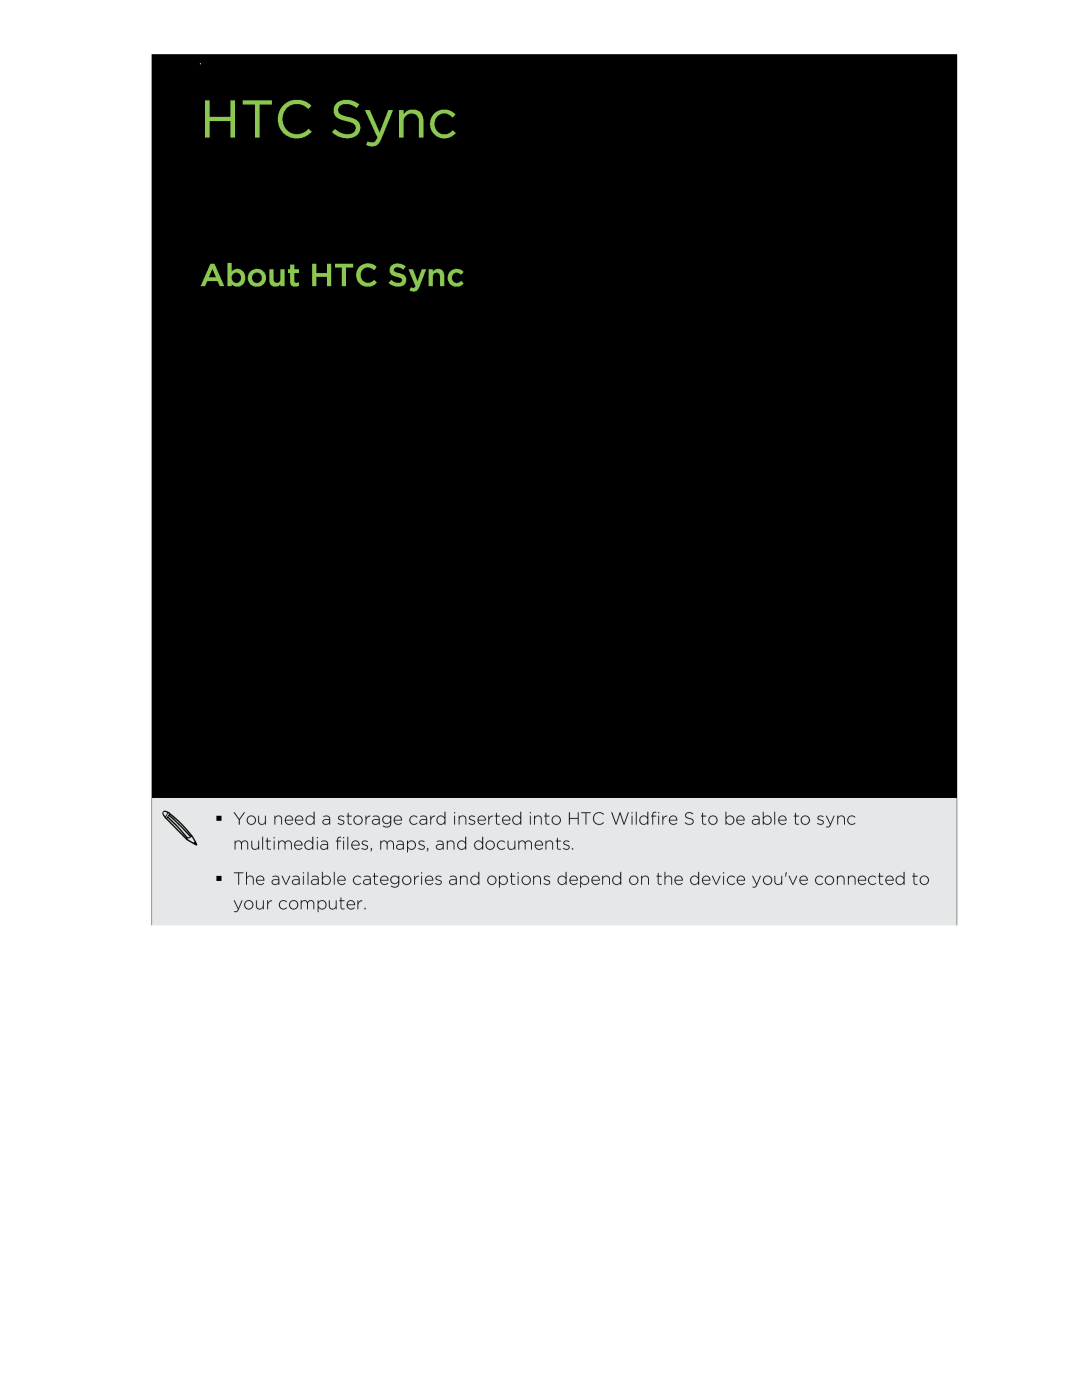 HTC manual About HTC Sync 